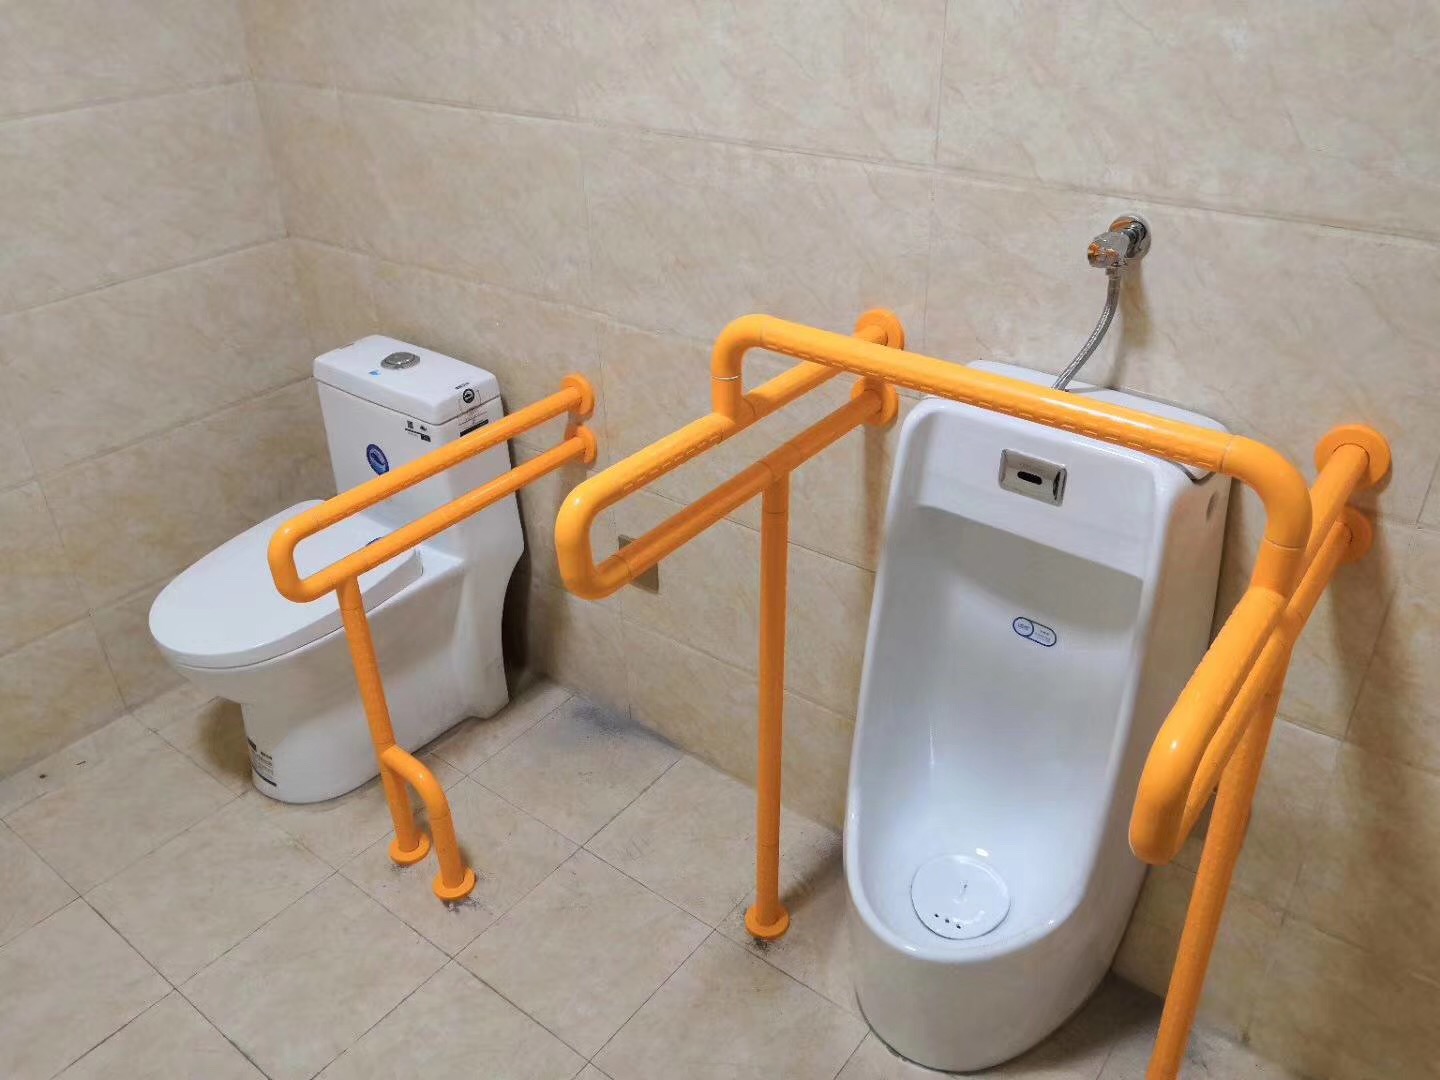 Where should grab bars be placed？